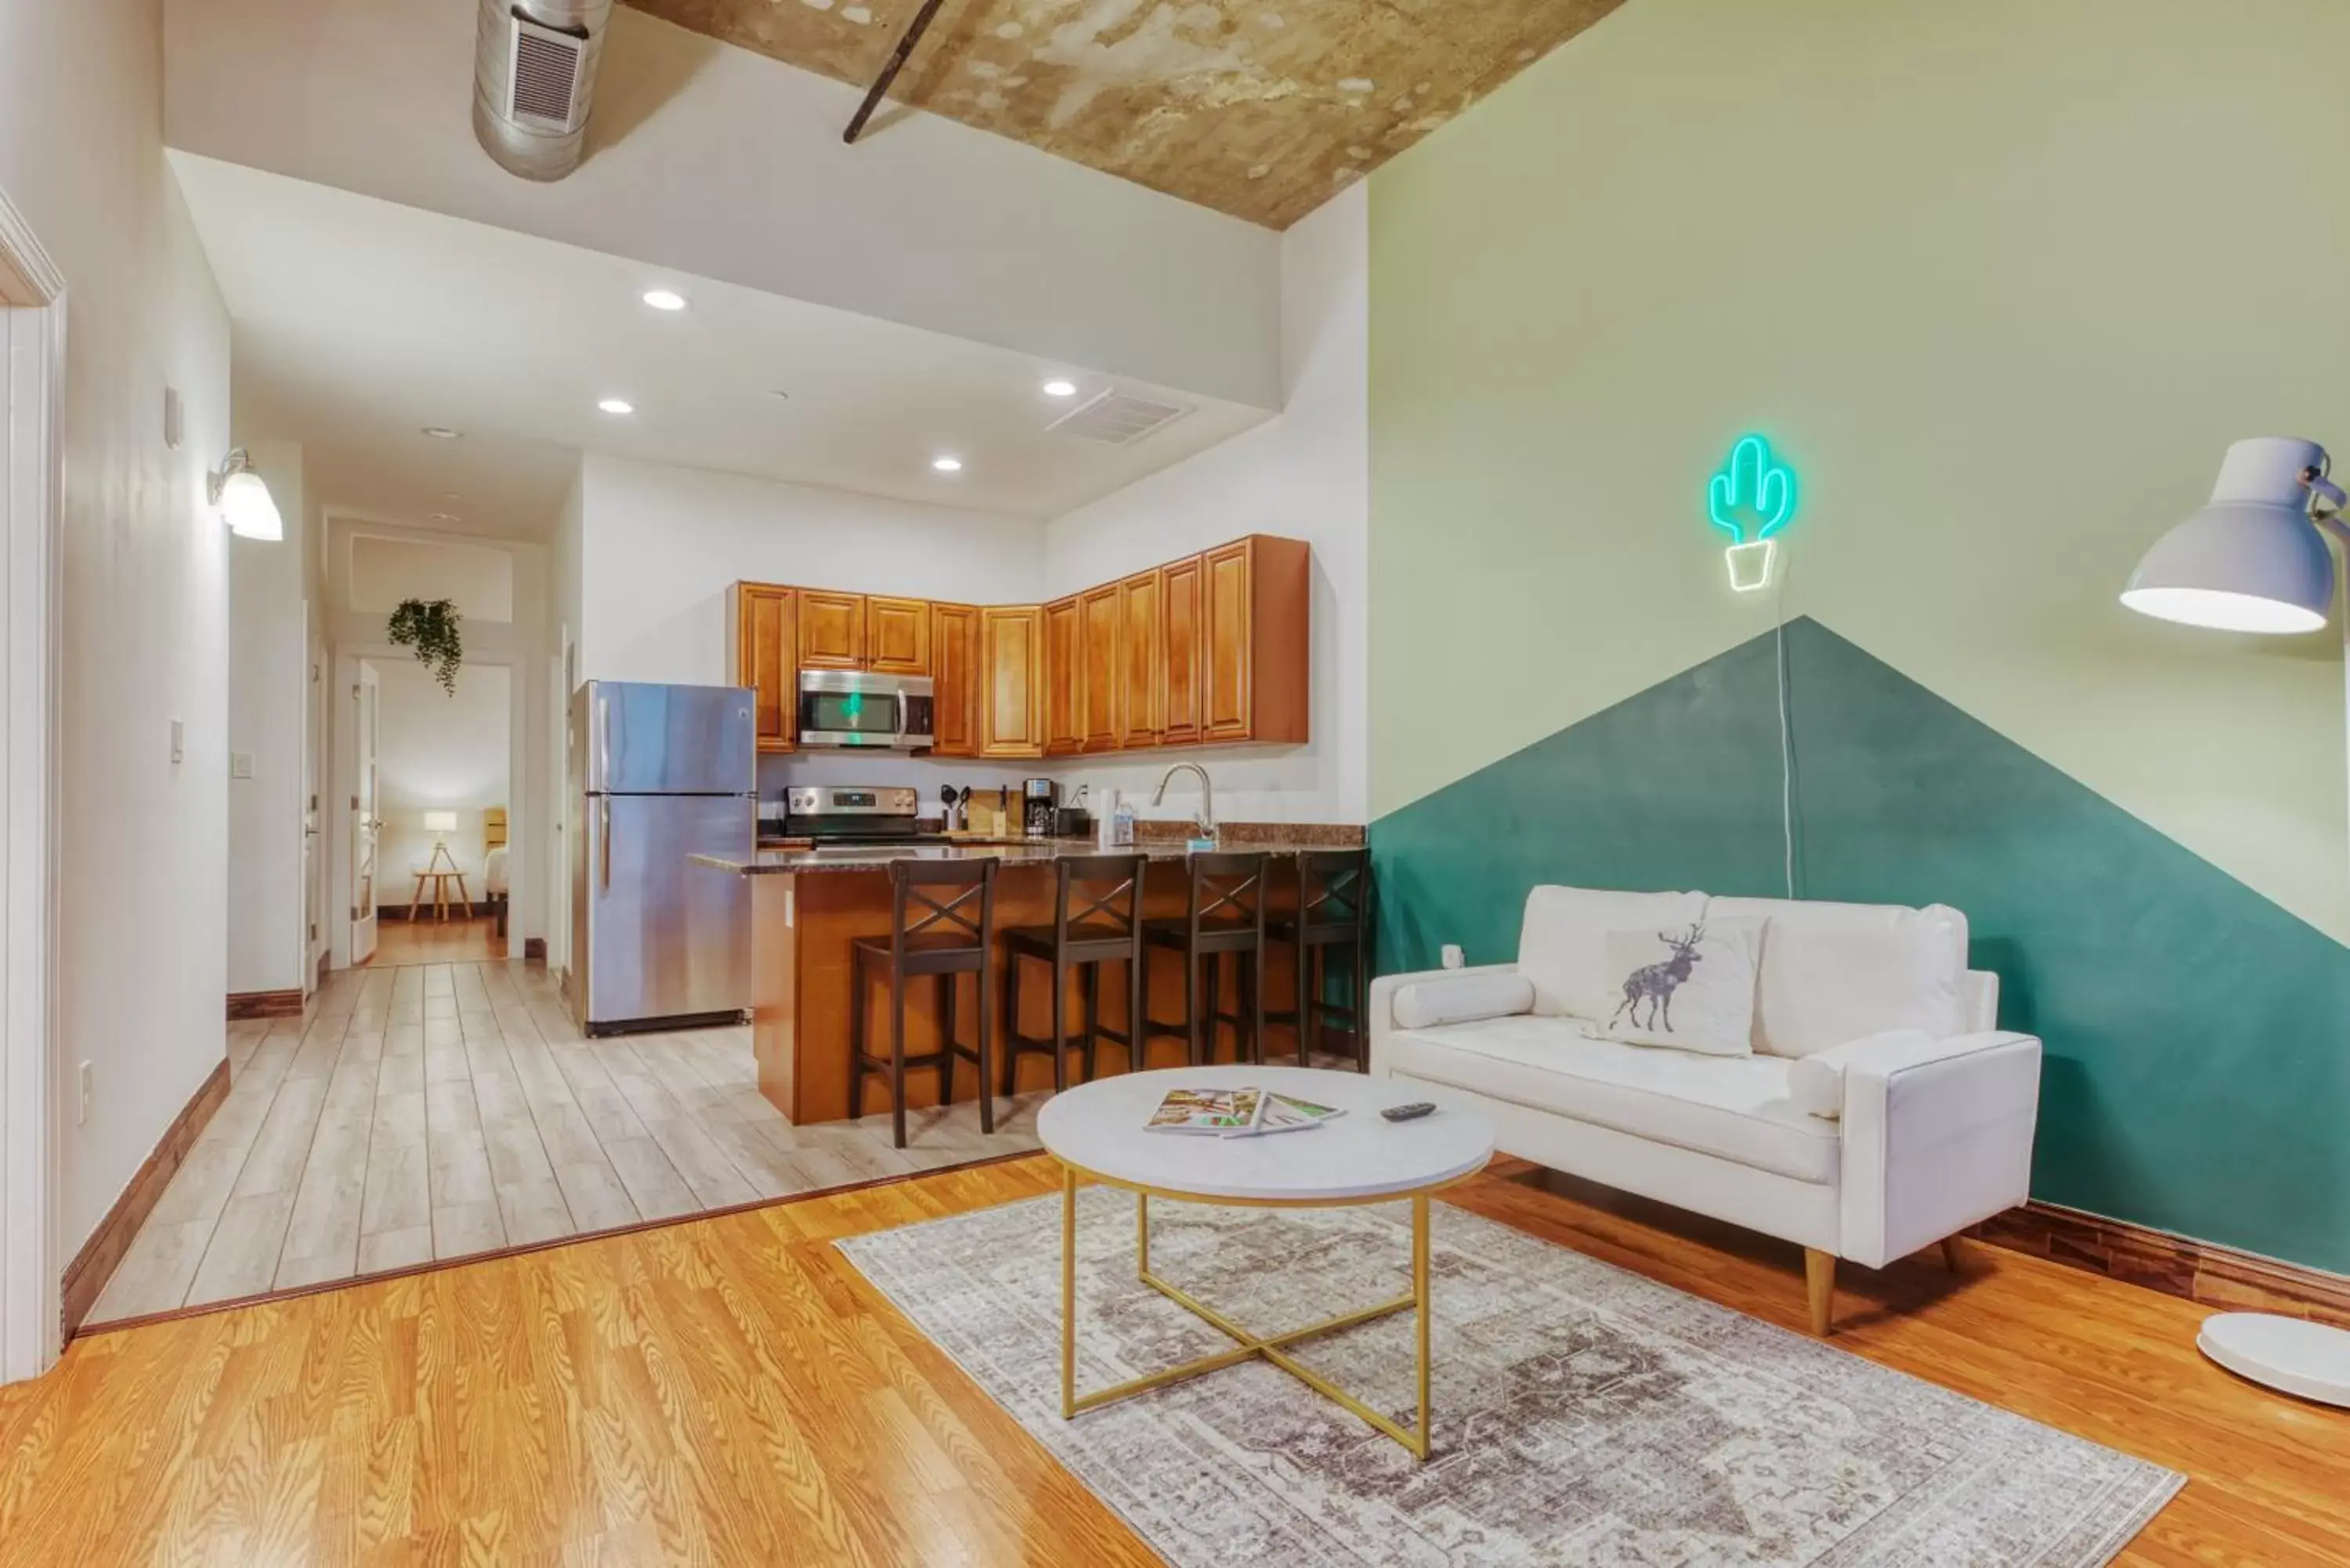 Deluxe Apartment in Sosuite at Independence Lofts - Callowhill